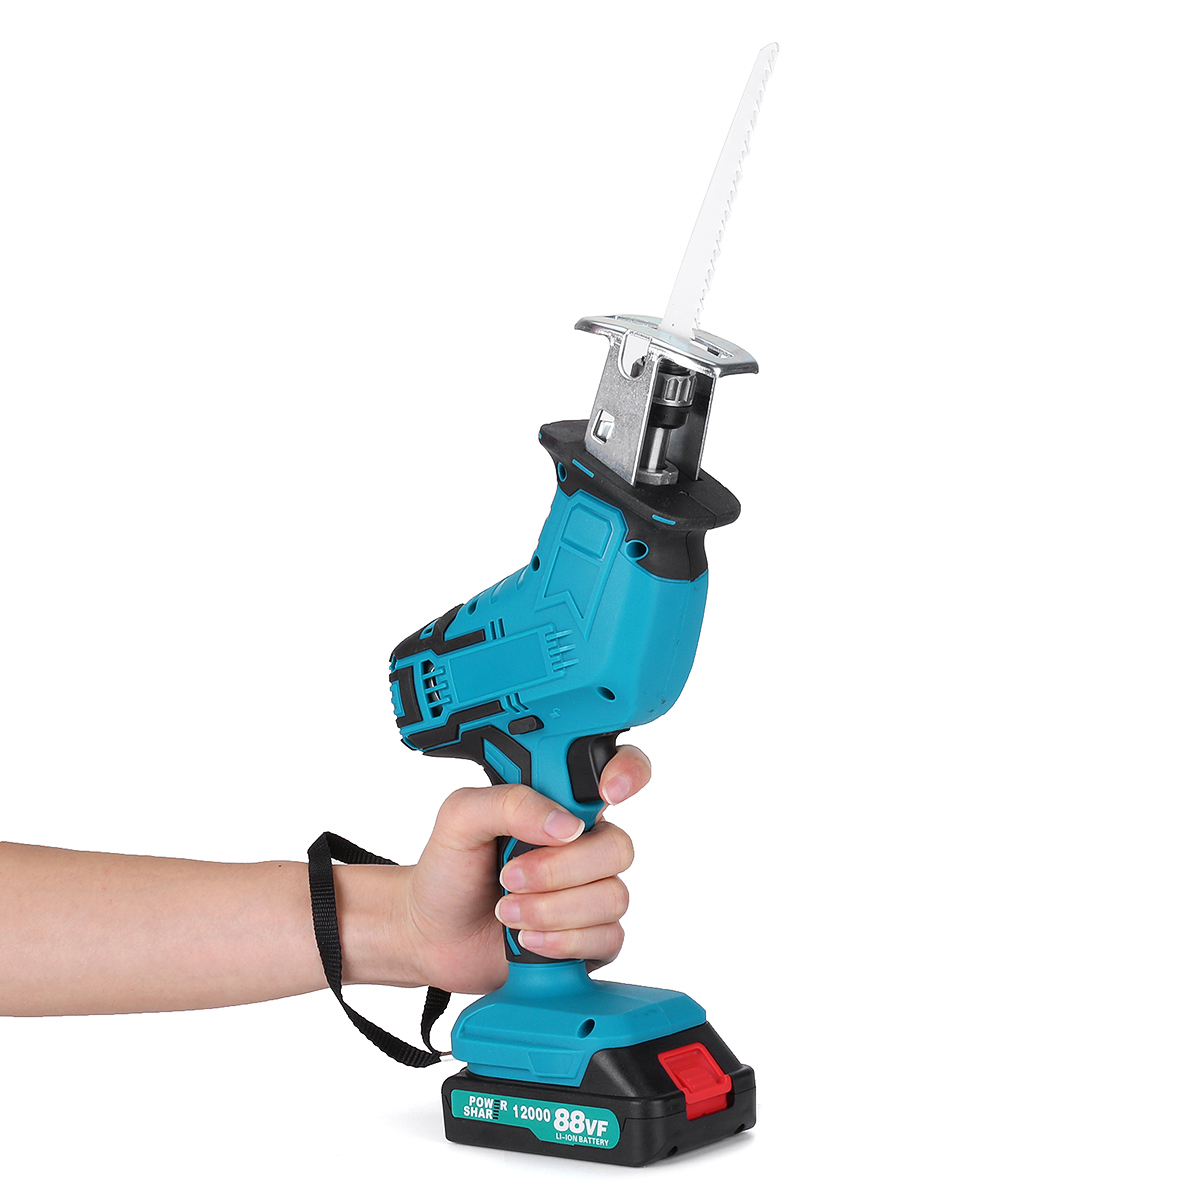 88V-12000mAh-Cordless-Reciprocating-Saw-Adjustable-Speed-Electric-Cutting-Chainsaw-For-Wood-1781939-10